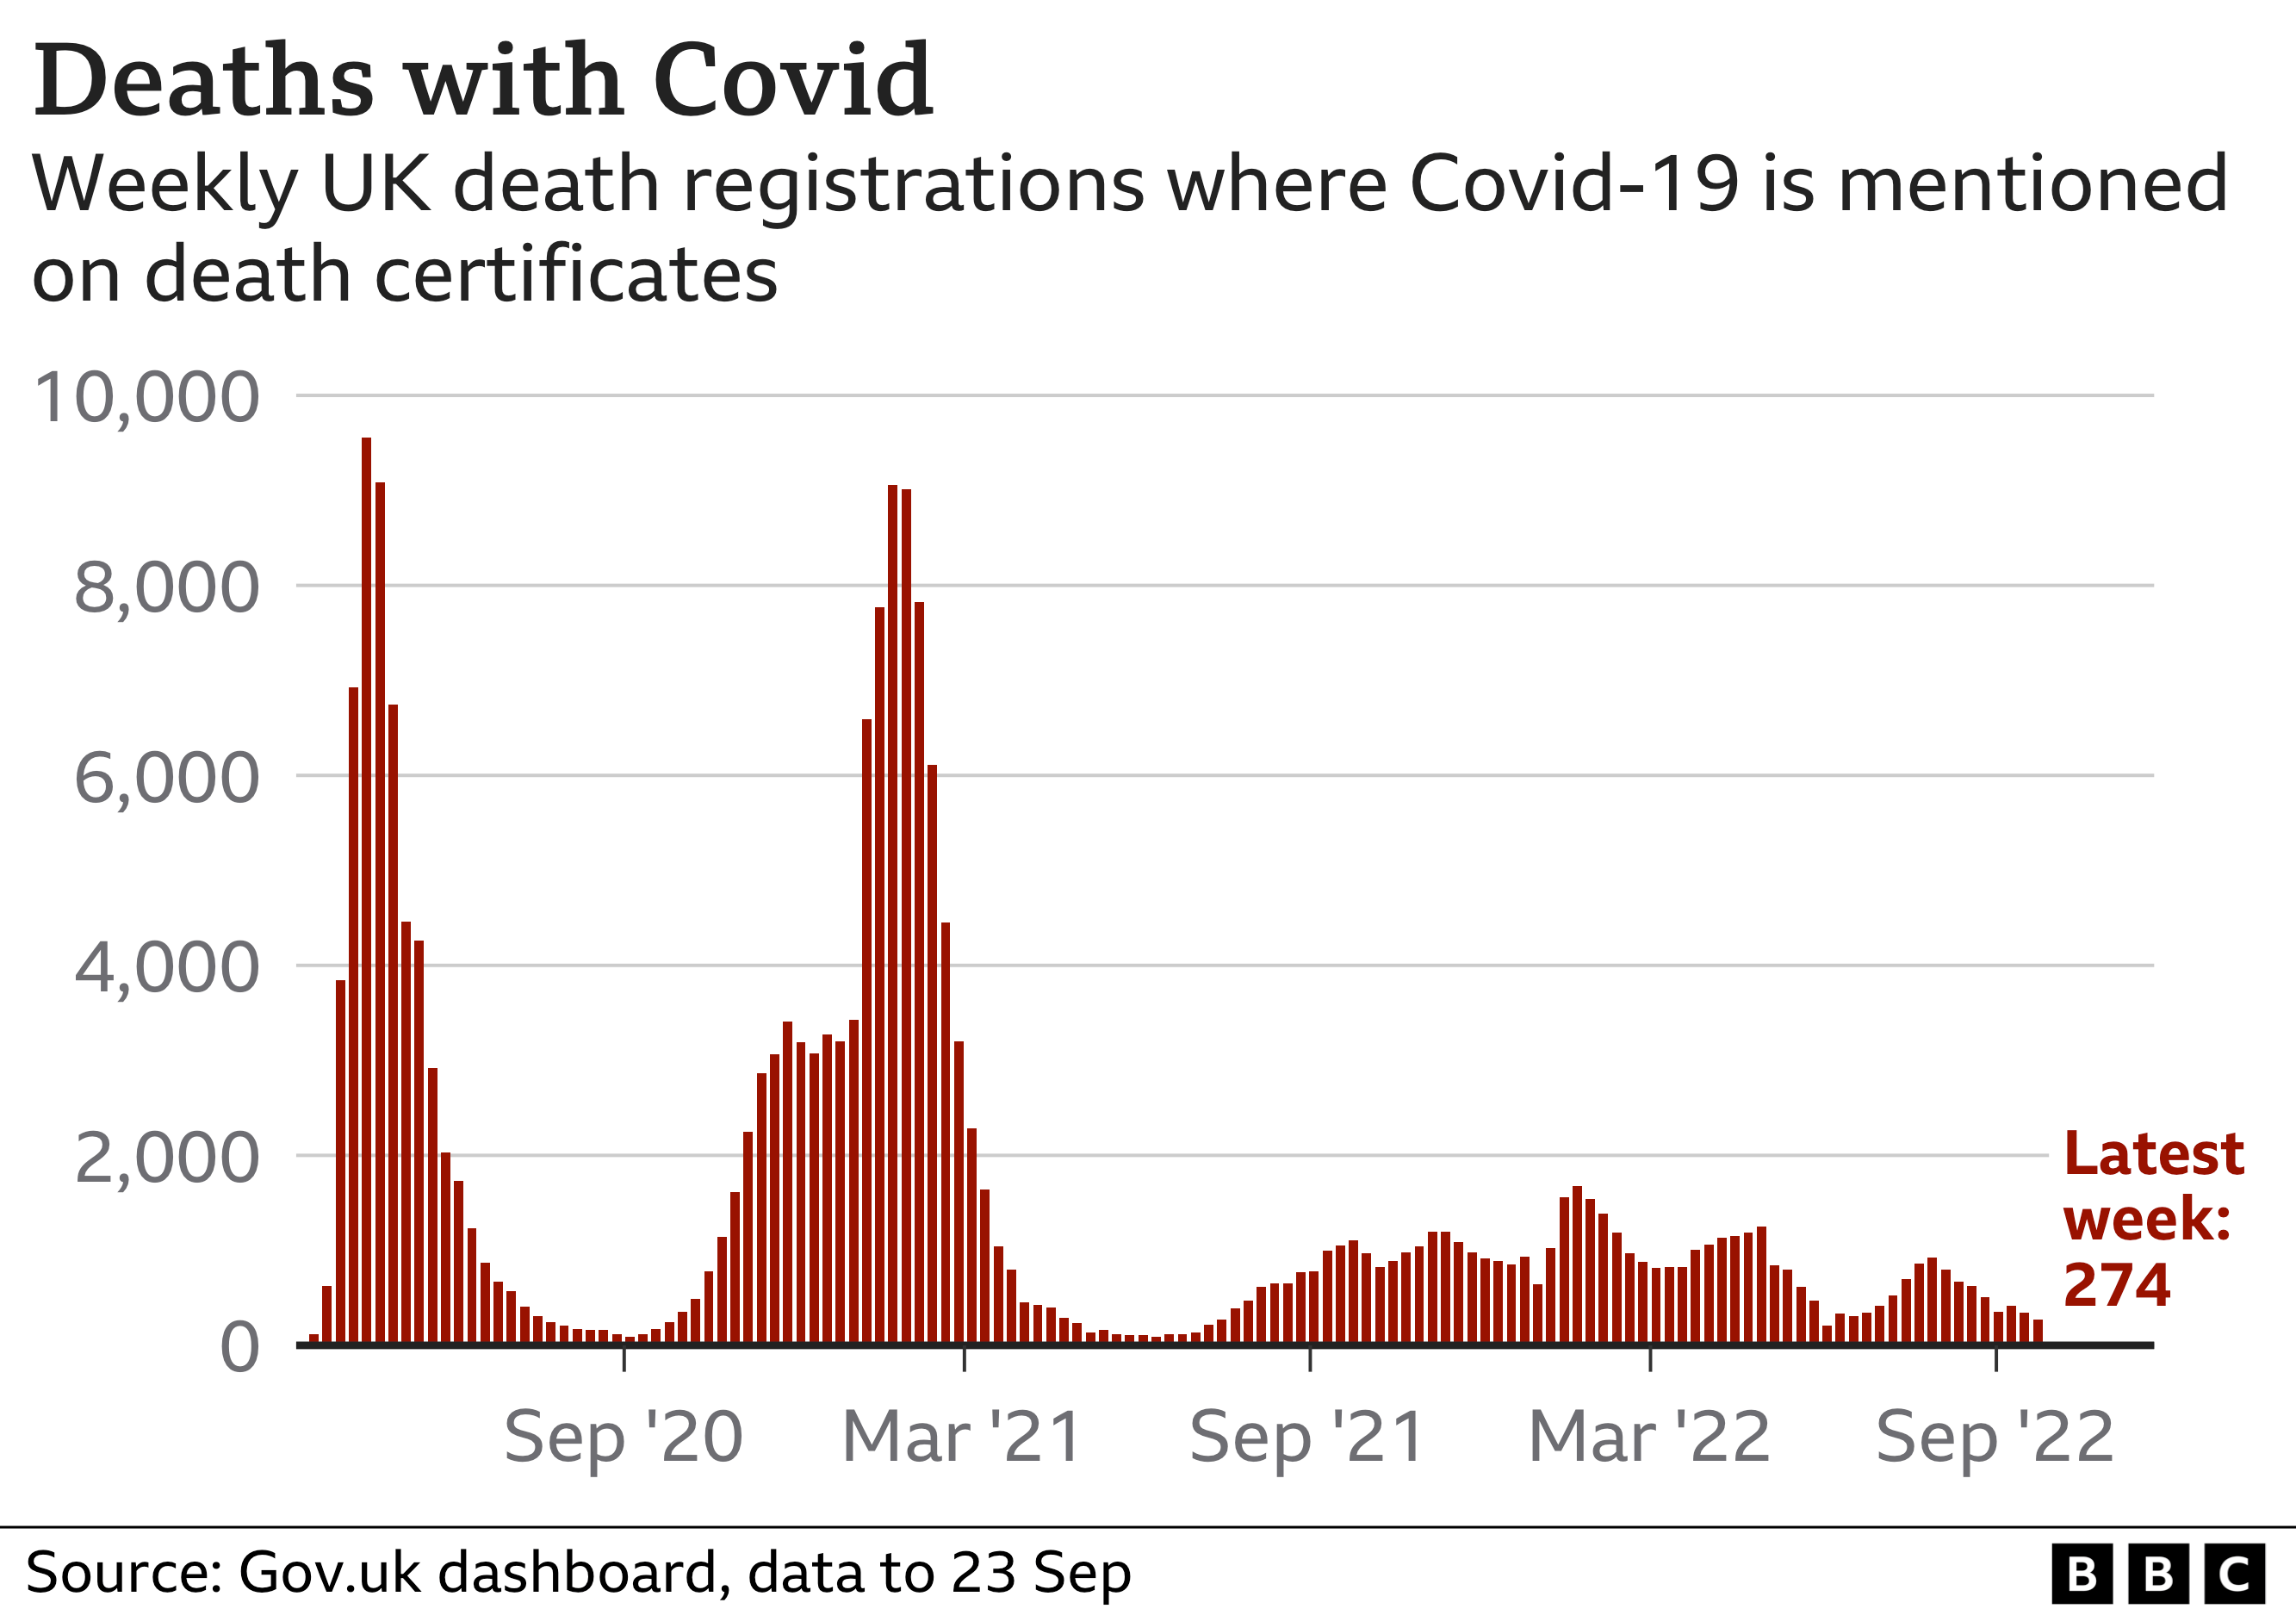 Chart showing weekly death records where Covid-19 was mentioned on the death certificate.  Shows peaks in April 2020 of 9553. 9056 at the end of January 2021. 1673 at the end of January 2022 and 1248 at the end of April 2022. The current weekly total is 274. Data through 23 Sep.